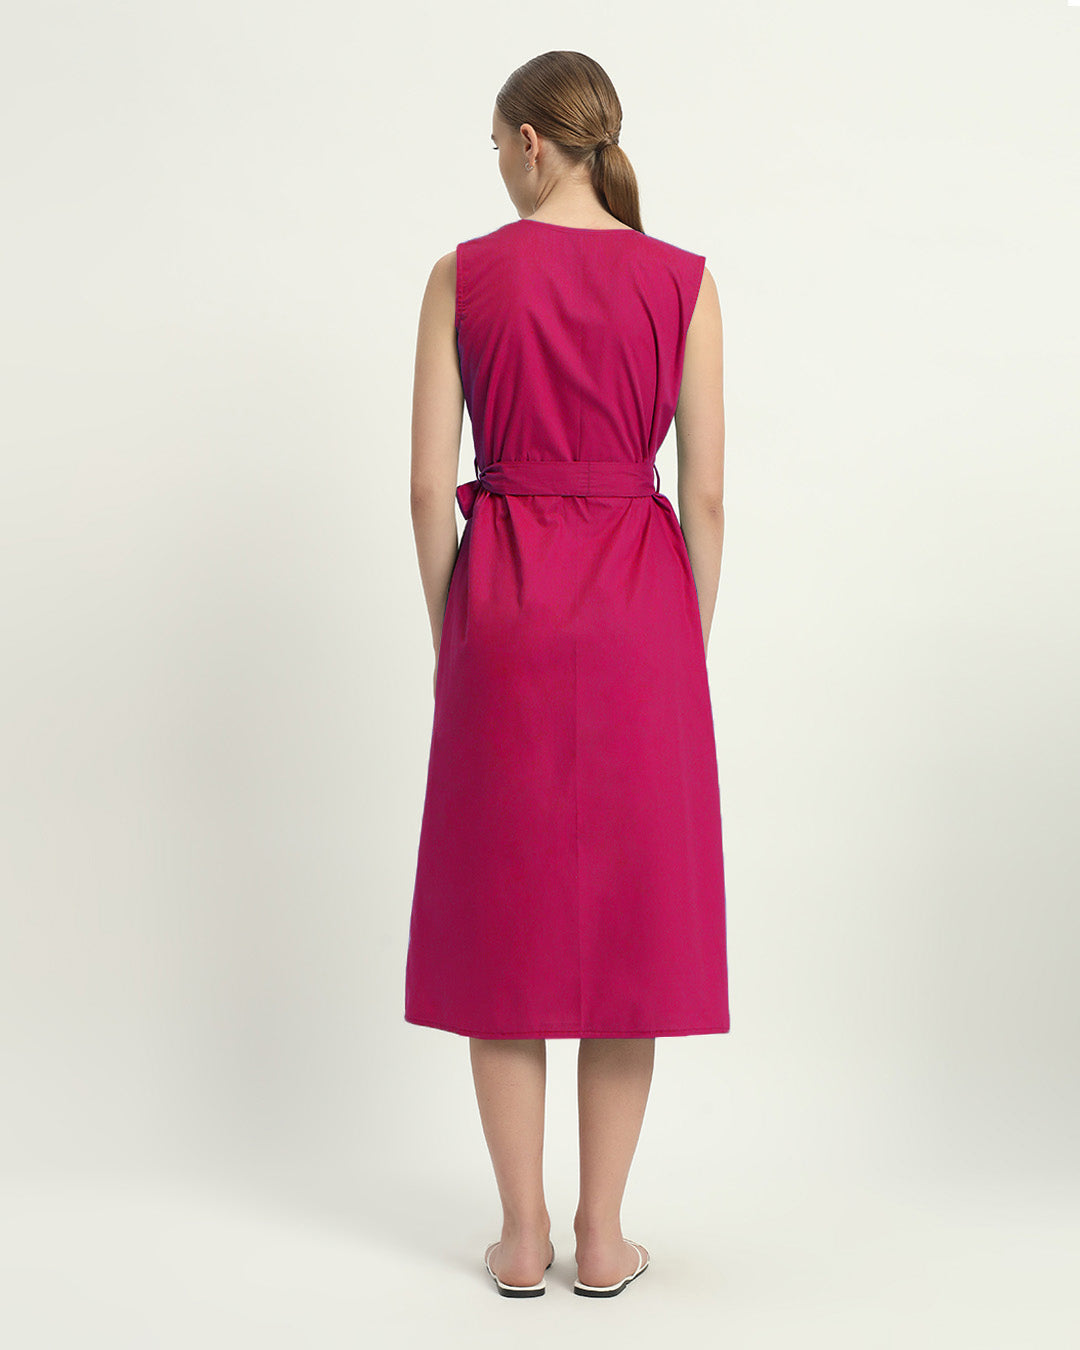 The Berry Windsor Cotton Dress